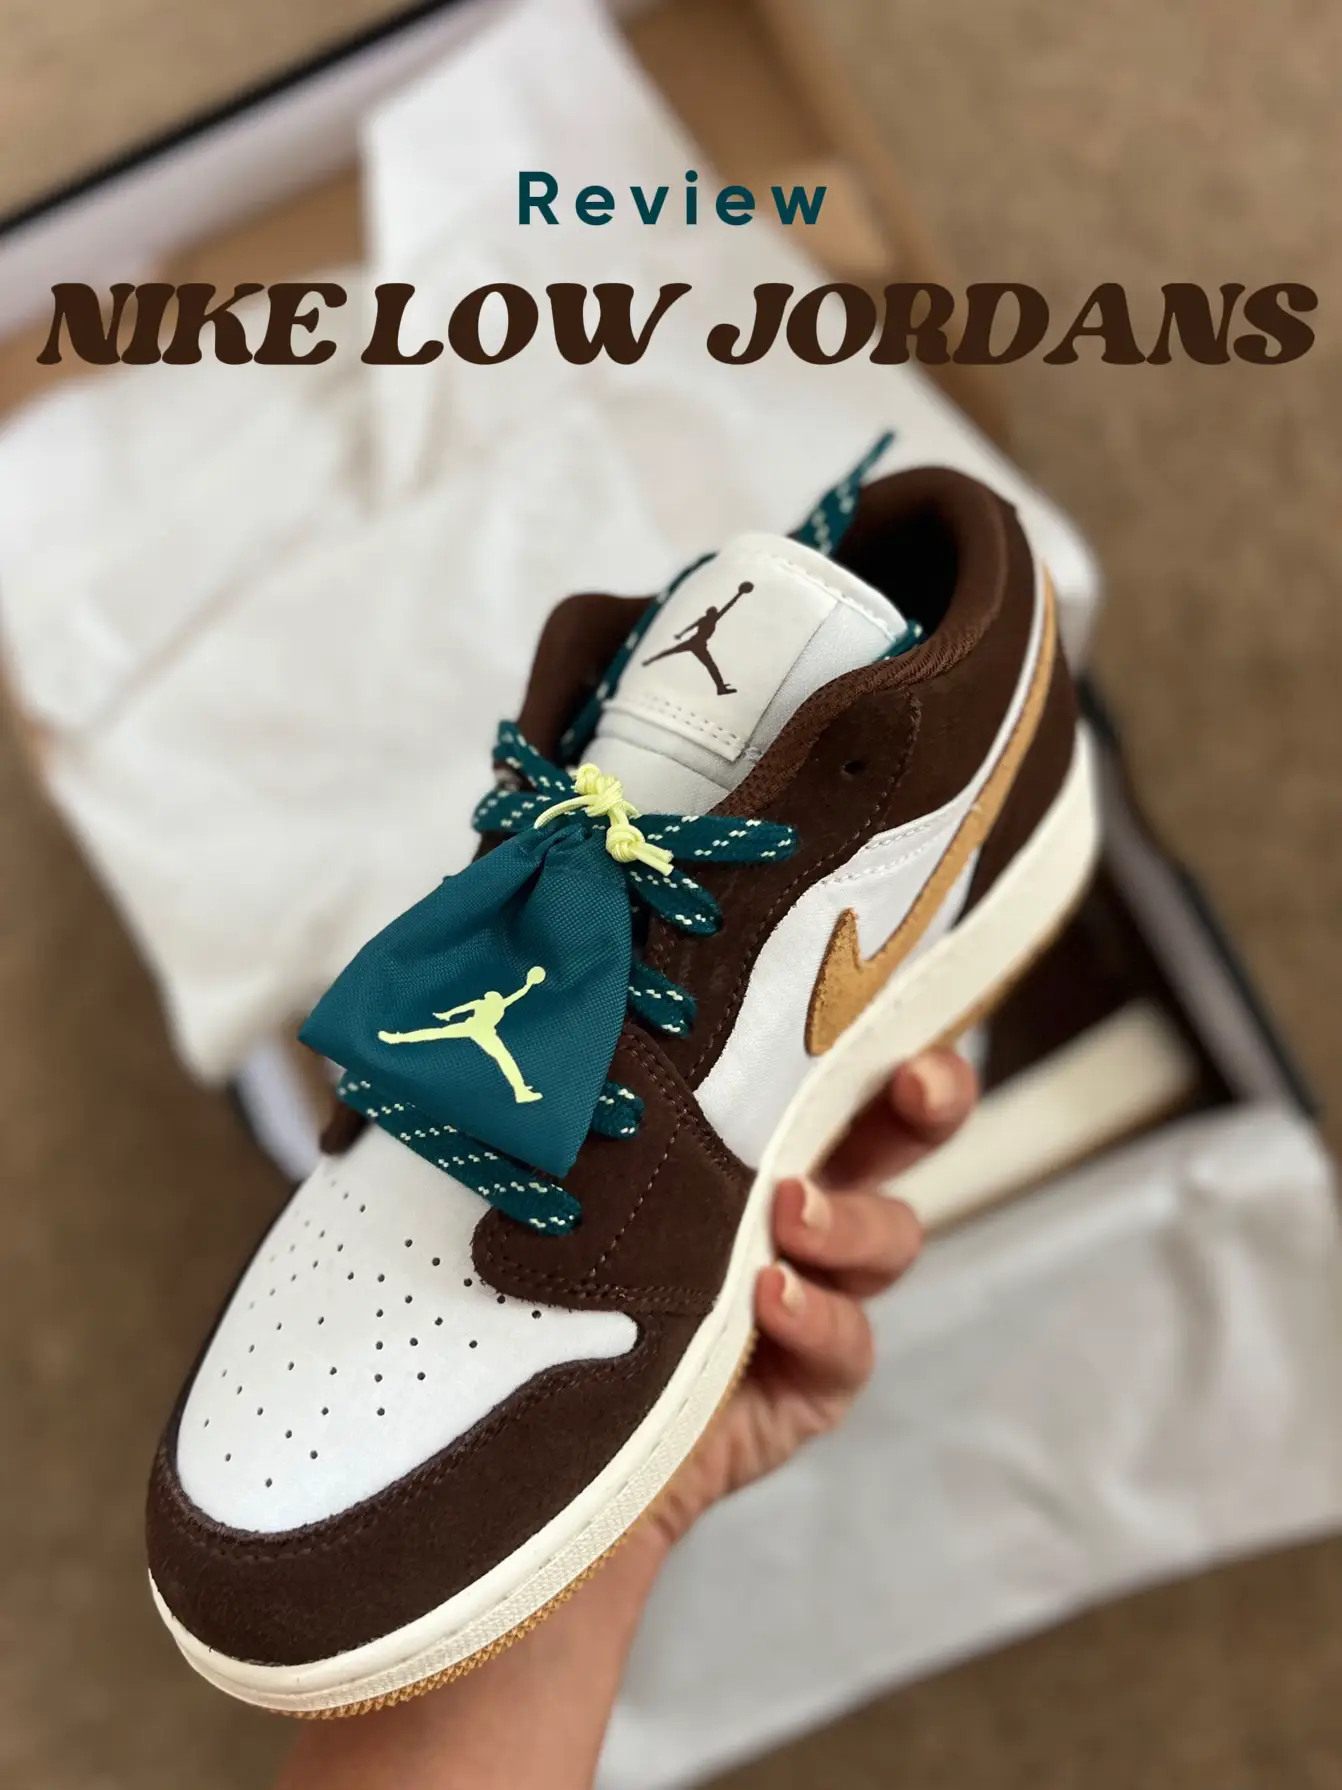 JUST DROPPED: NIKE LOW JORDAN, Gallery posted by Sophia Stro